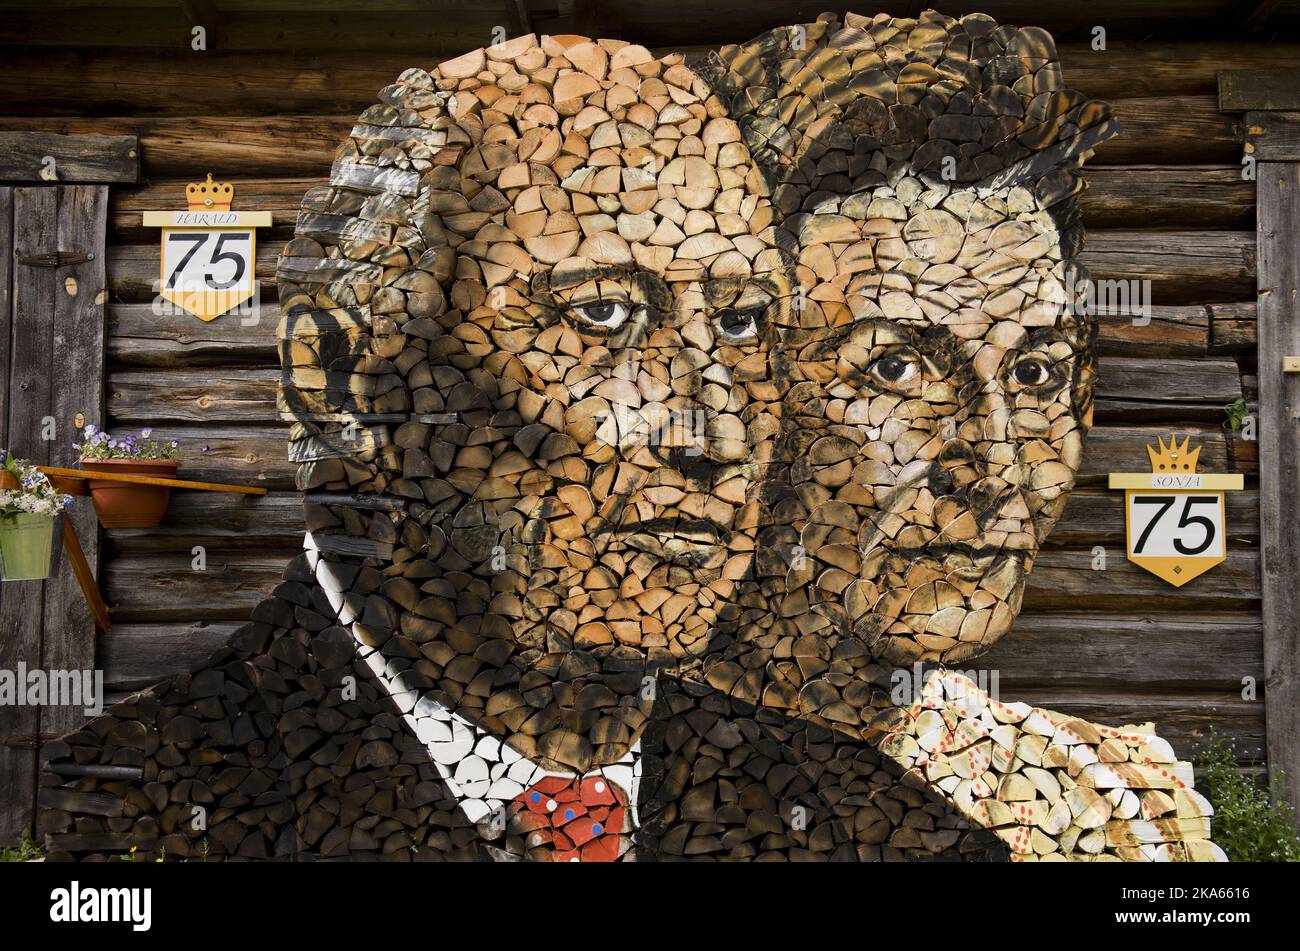 This winter Ole Kristian Kjelling (80) and his wife Zofia will be kept warm by King Harald and Queen Sonja of Norway. A month ago he started the task of stacking firewood into a portrait of the royal couple. It took 6-7 wheelbarrow loads, or 200-300 kilos of birch wood to complete the project. - I have painted everything with ordinary oil paints and been working under a tarpaulin for the last month. It is sculpted and then painted. ItÕs a good thing I have the patience of a horse - the weather has not been on my side Stock Photo